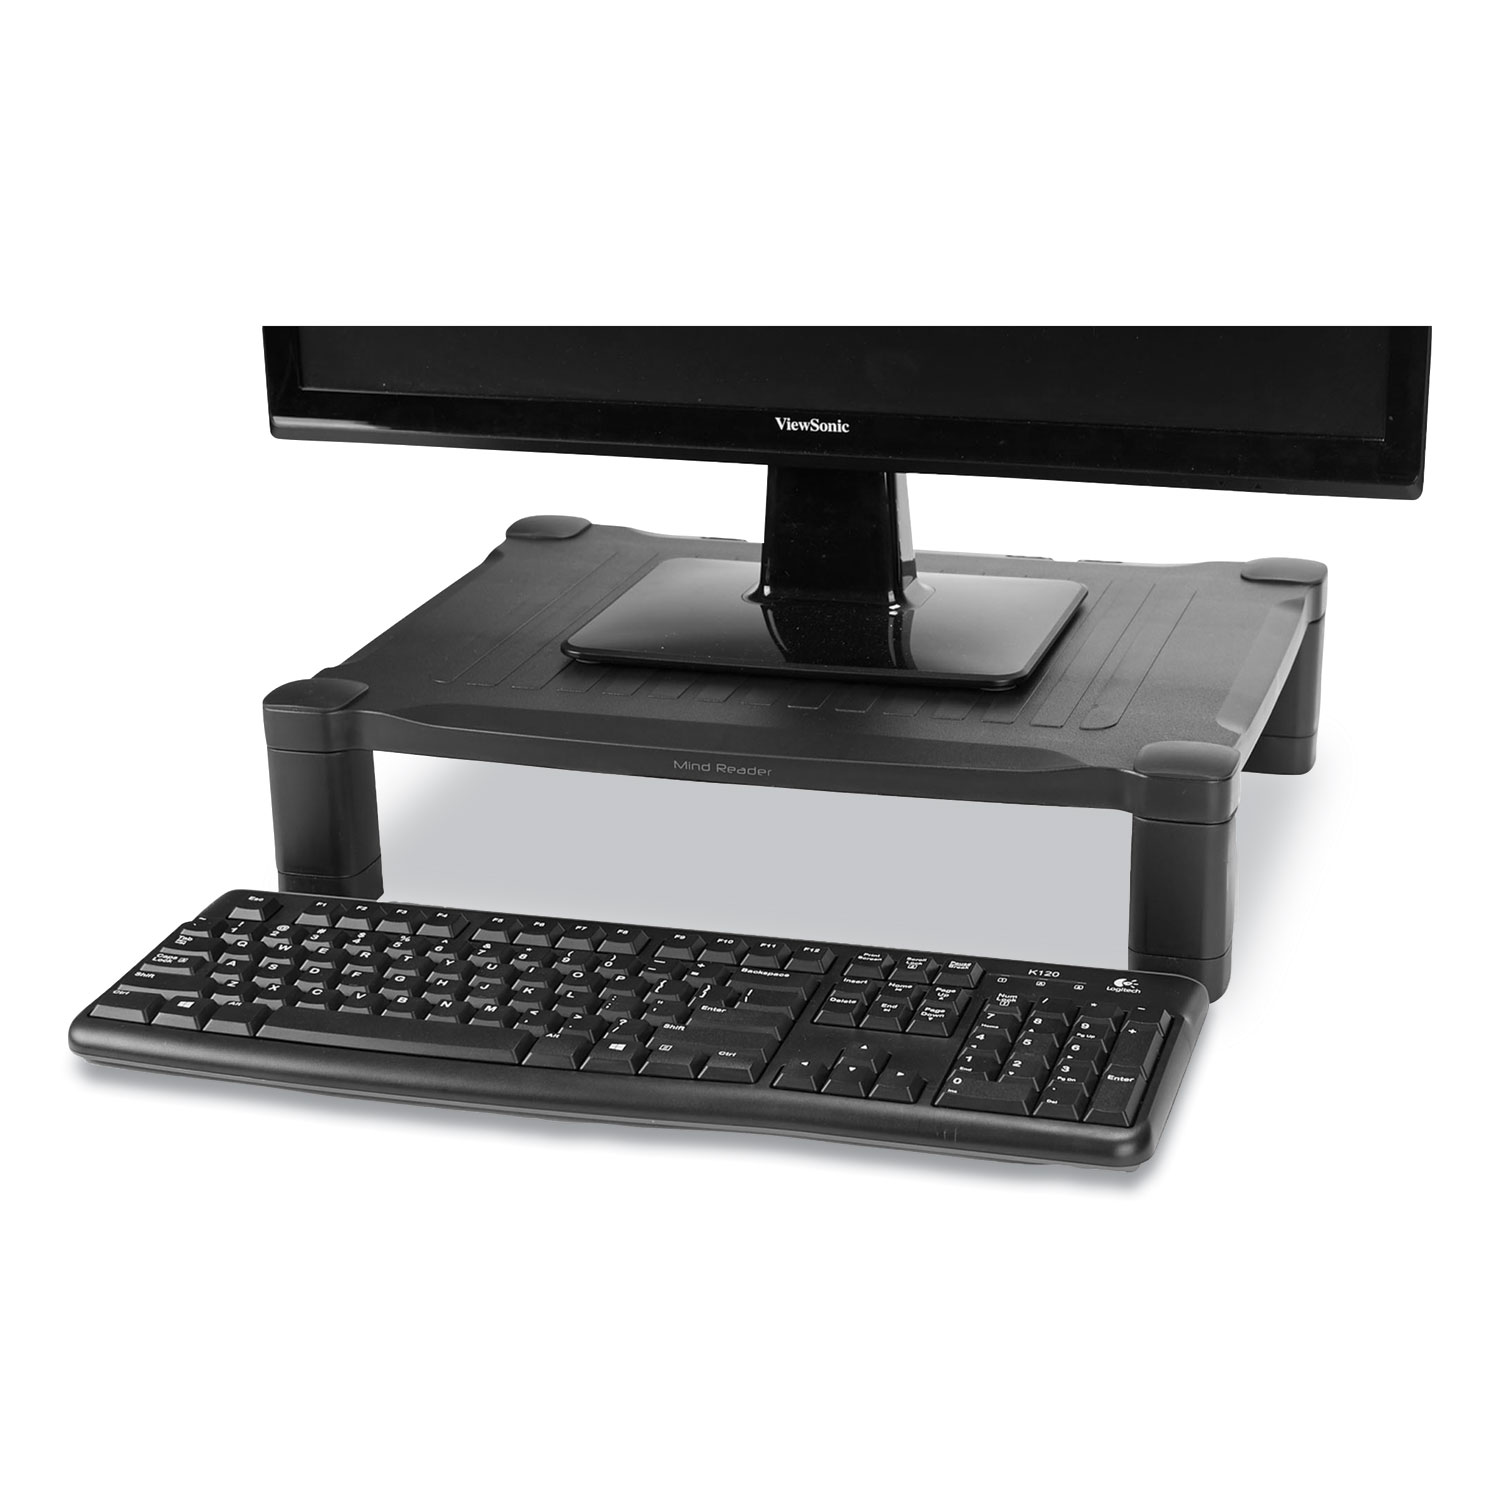  Mind Reader PLMONST-BLK Adjustable Rectangular Monitor Stand, 17 x 13 x 3.75 to 5.75, Black, Supports 22 lbs (EMS24395821) 